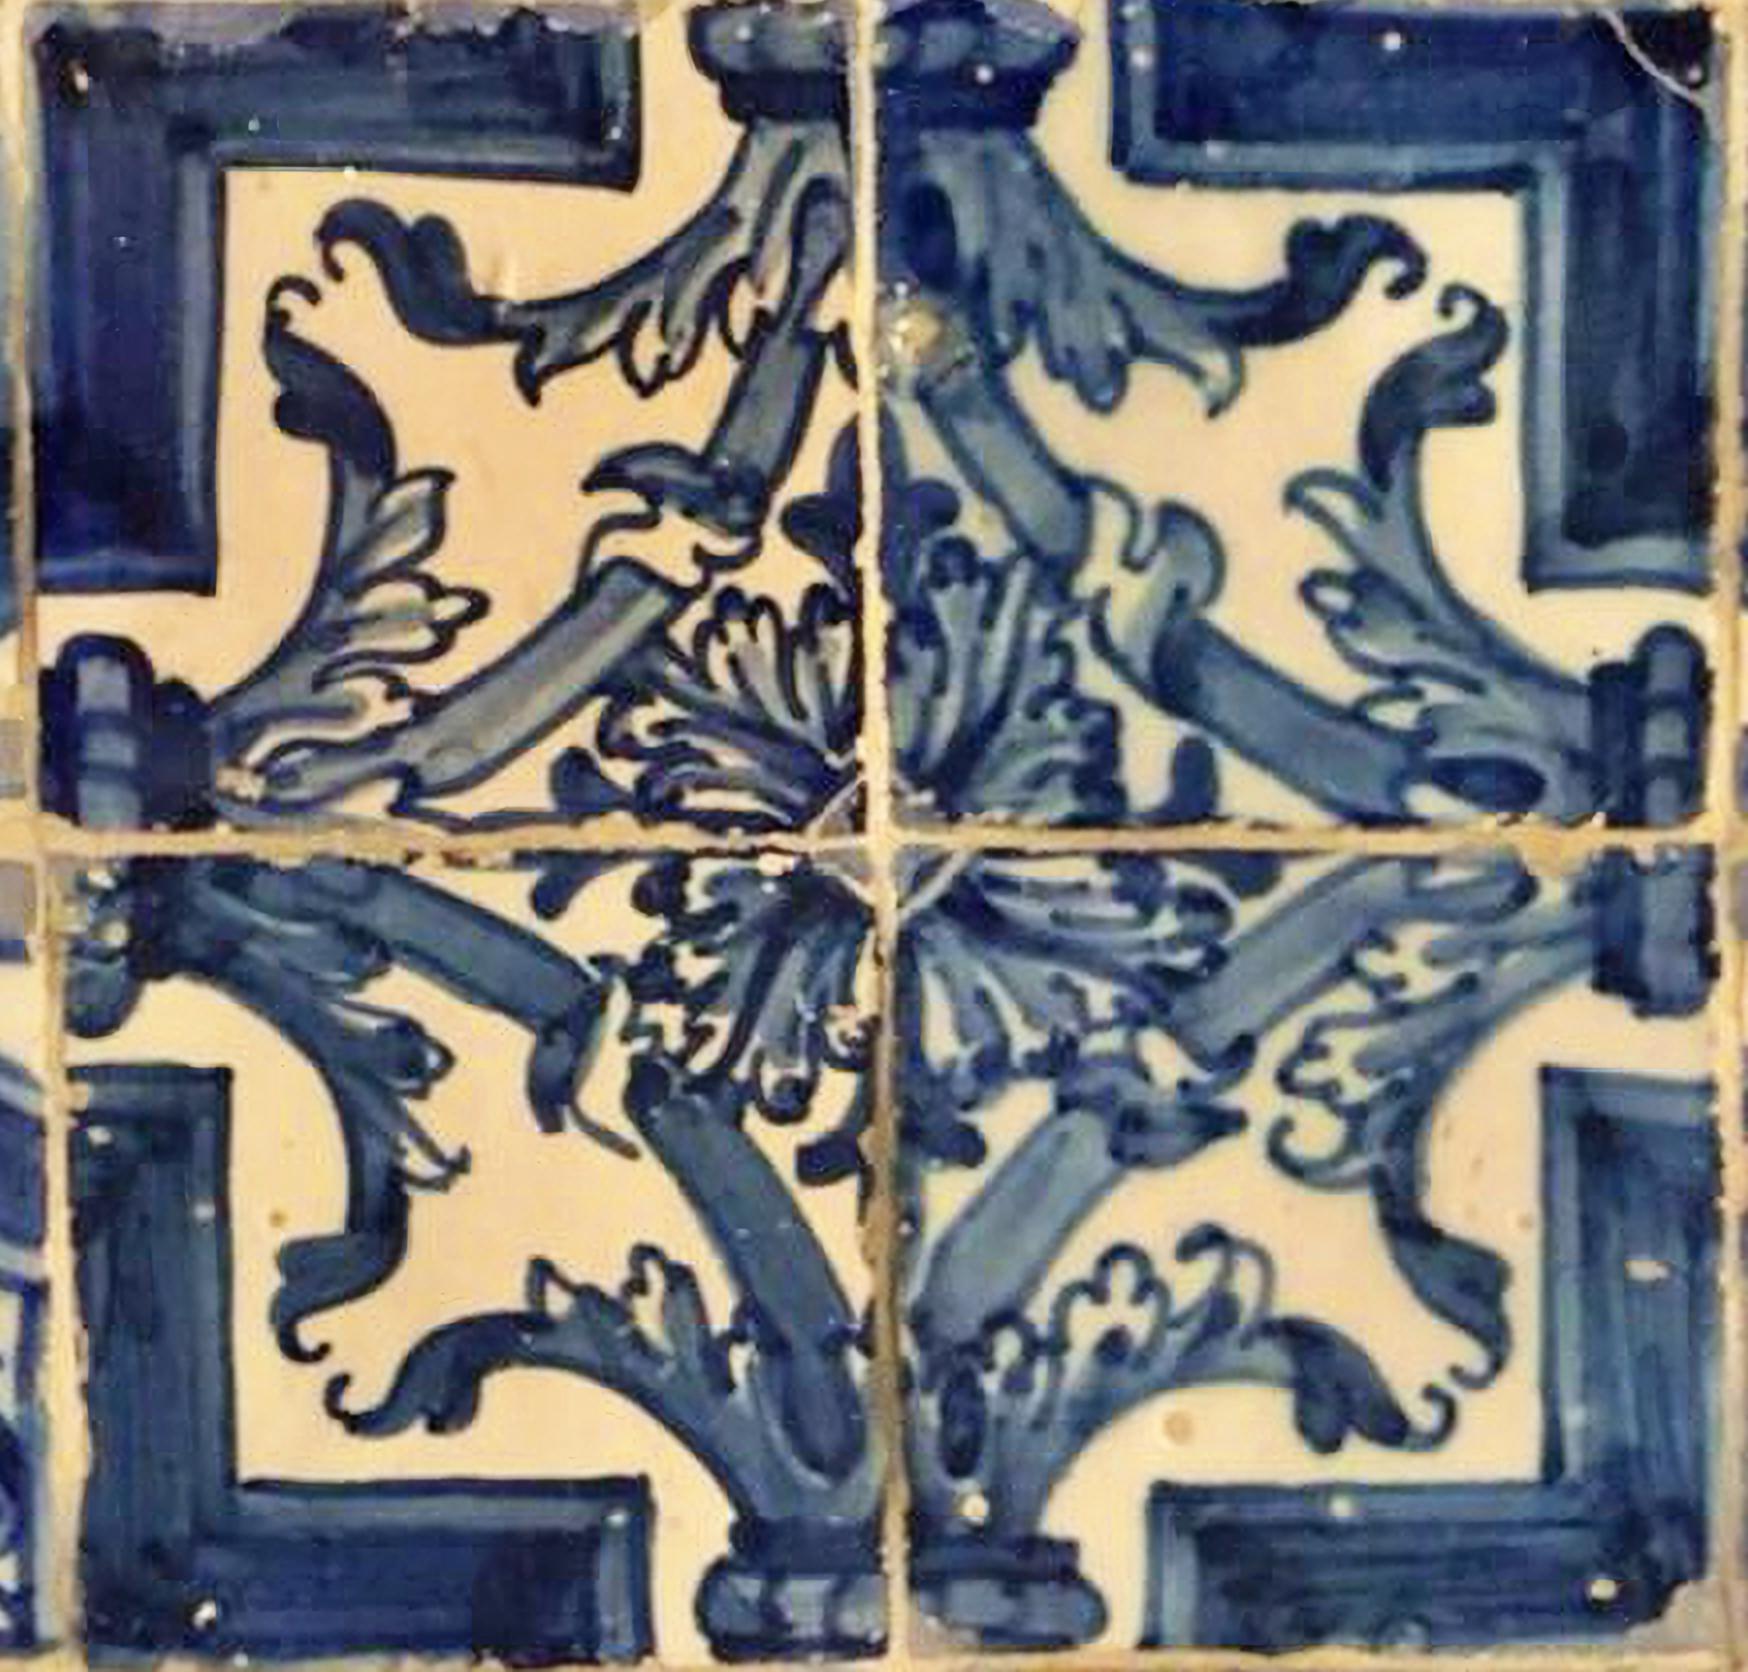 17th Century Portuguese Tile Panel
Restored
56cm x 56cm
14cm x 14cm tiles

With certificate of authenticity and export issued by the Directorate General of Portuguese Cultural Heritage, the only official department for issuing certificates for works